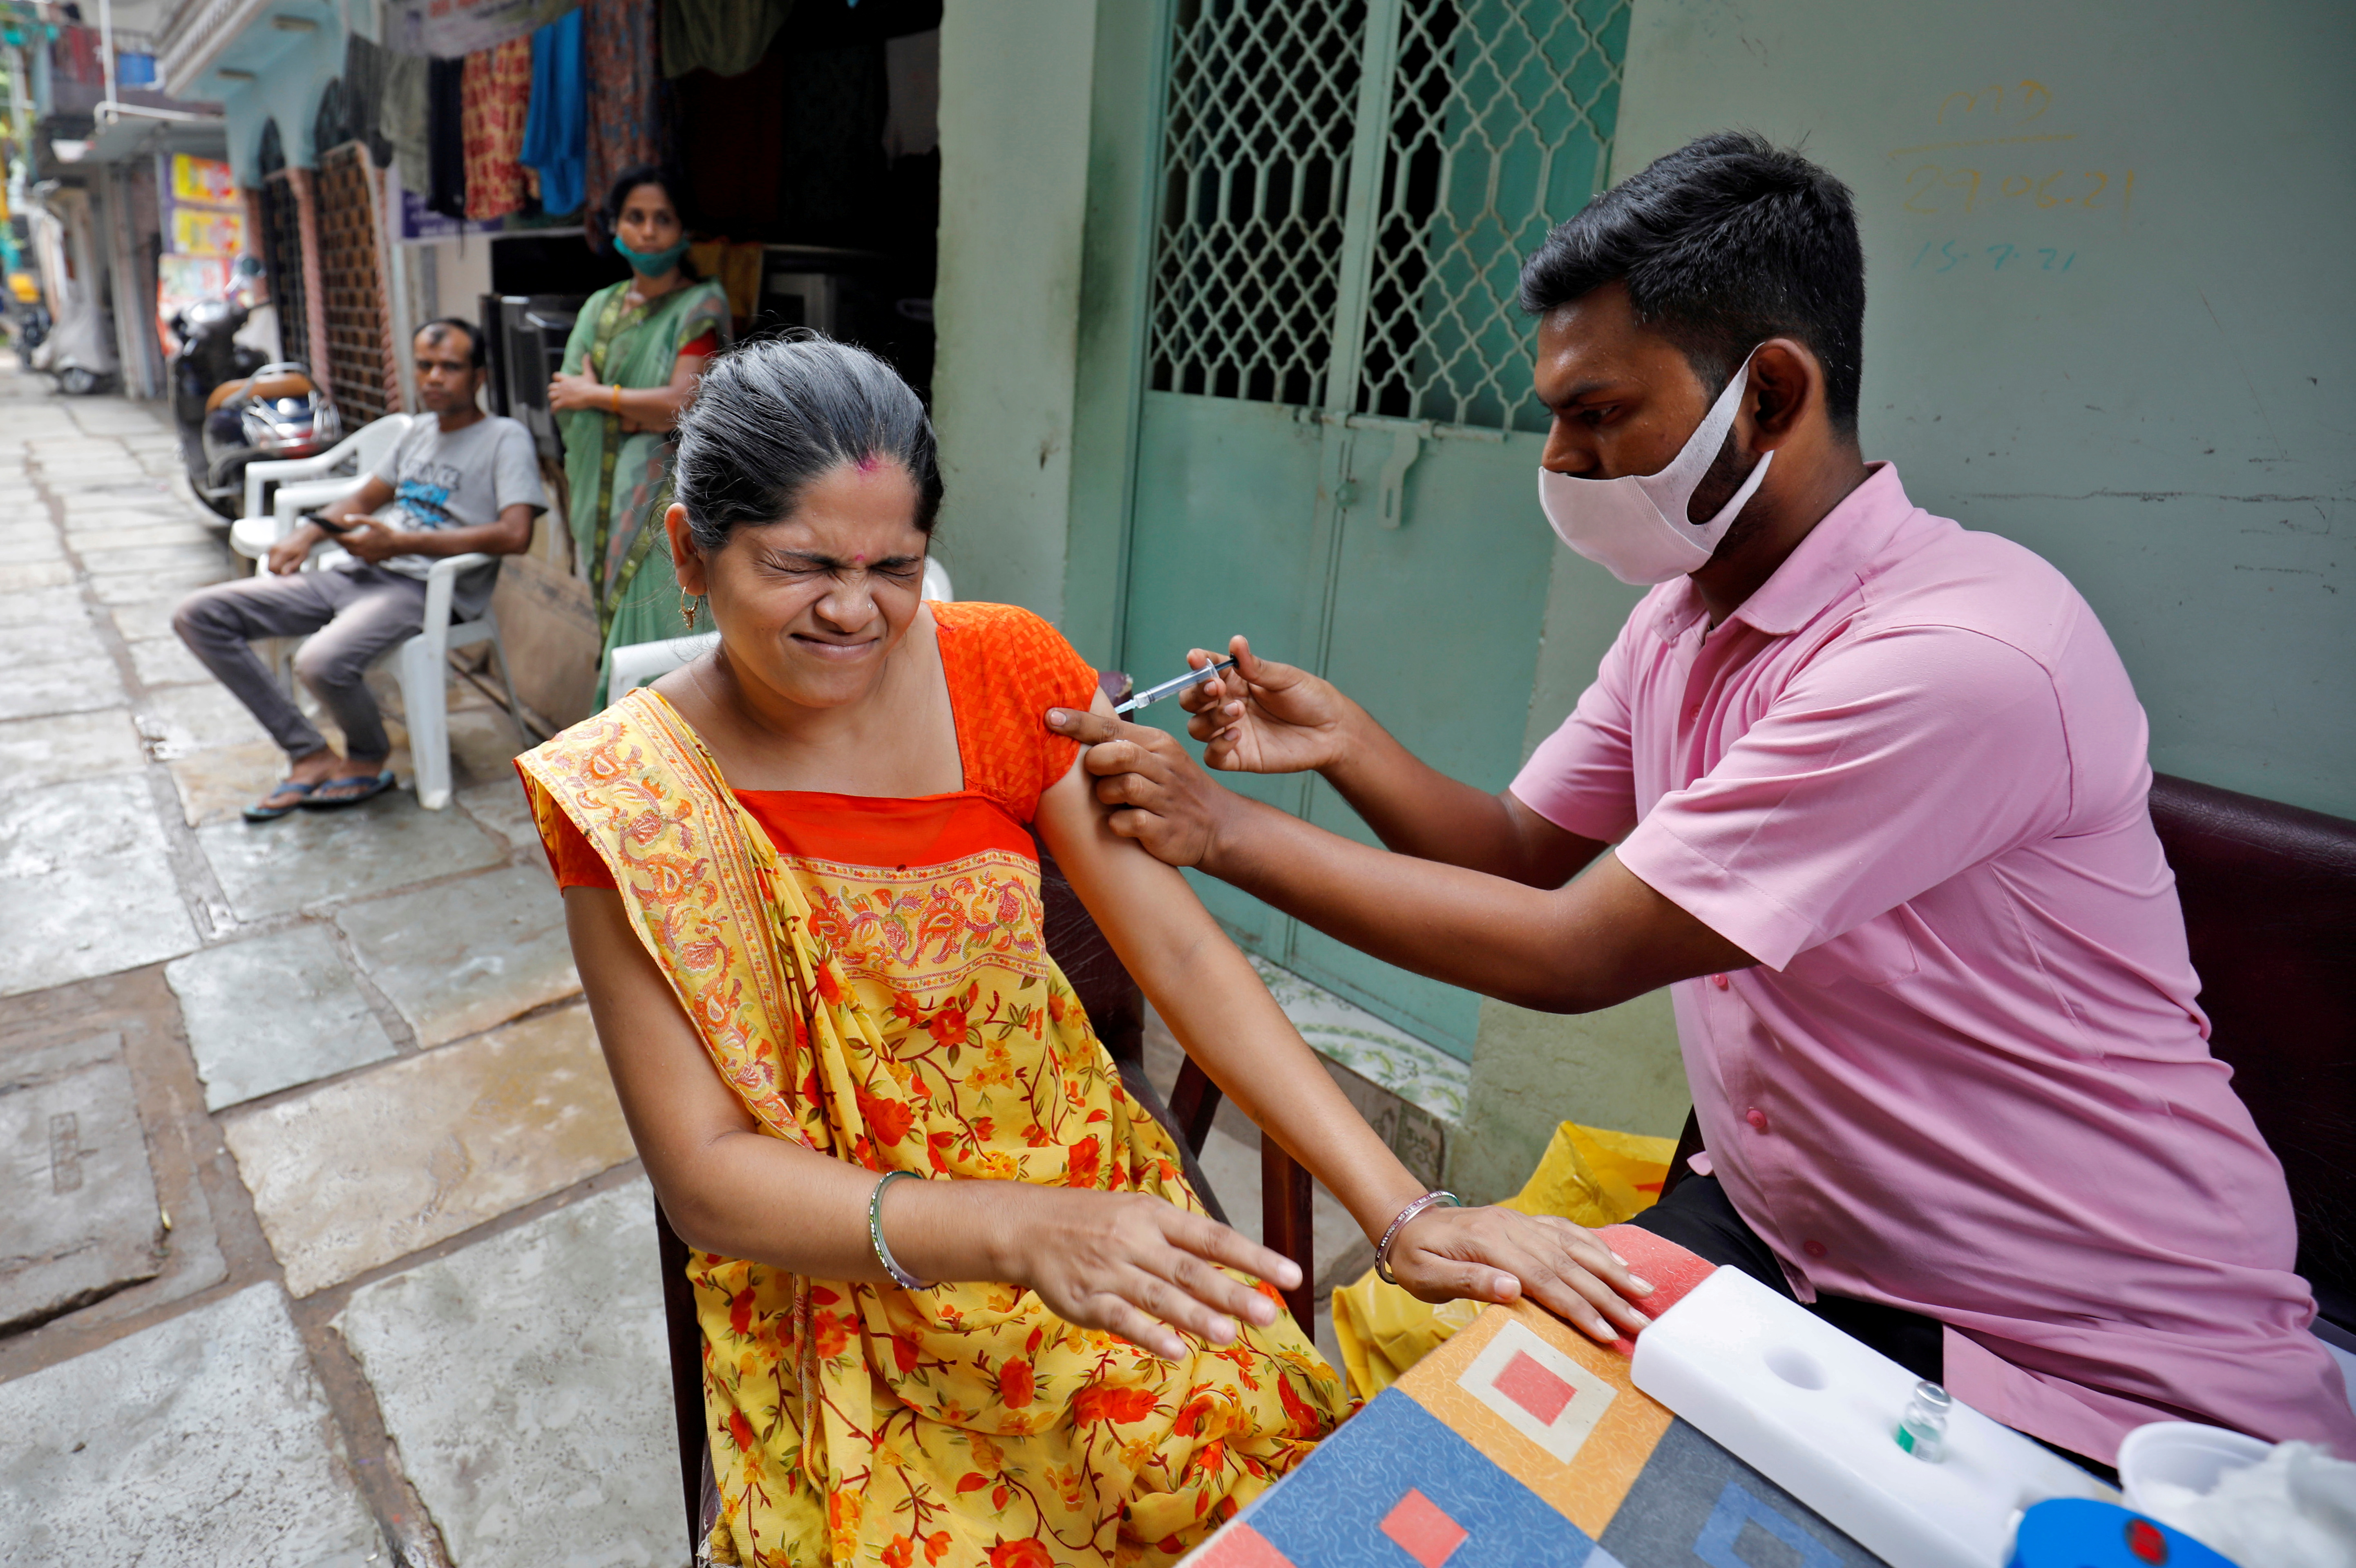 A woman reacts as she receives a dose of the COVISHIELD vaccine, a coronavirus disease (COVID-19) vaccine manufactured by Serum Institute of India, in an alley at a slum area in Ahmedabad, India, September 28, 2021. REUTERS/Amit Dave